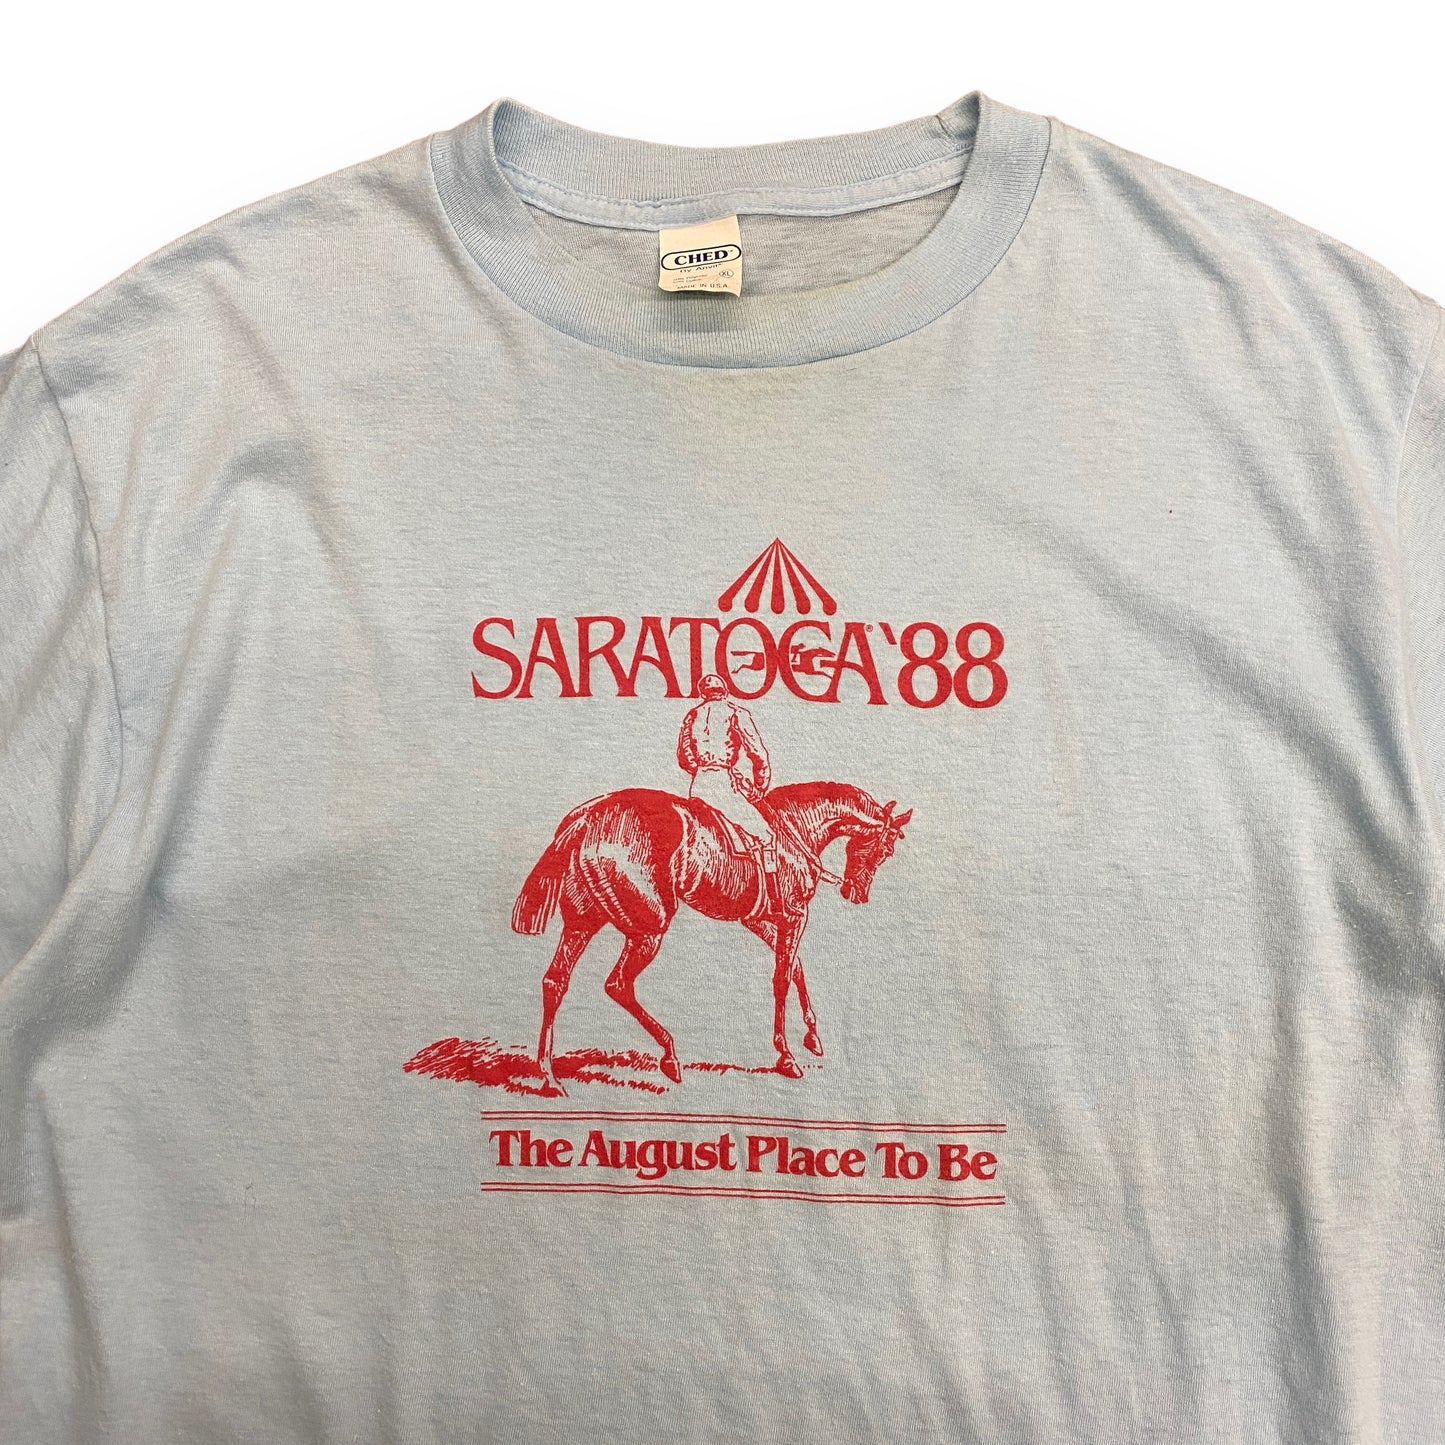 1988 Saratoga Race Track "The August Place to Be" Tee - Size XL